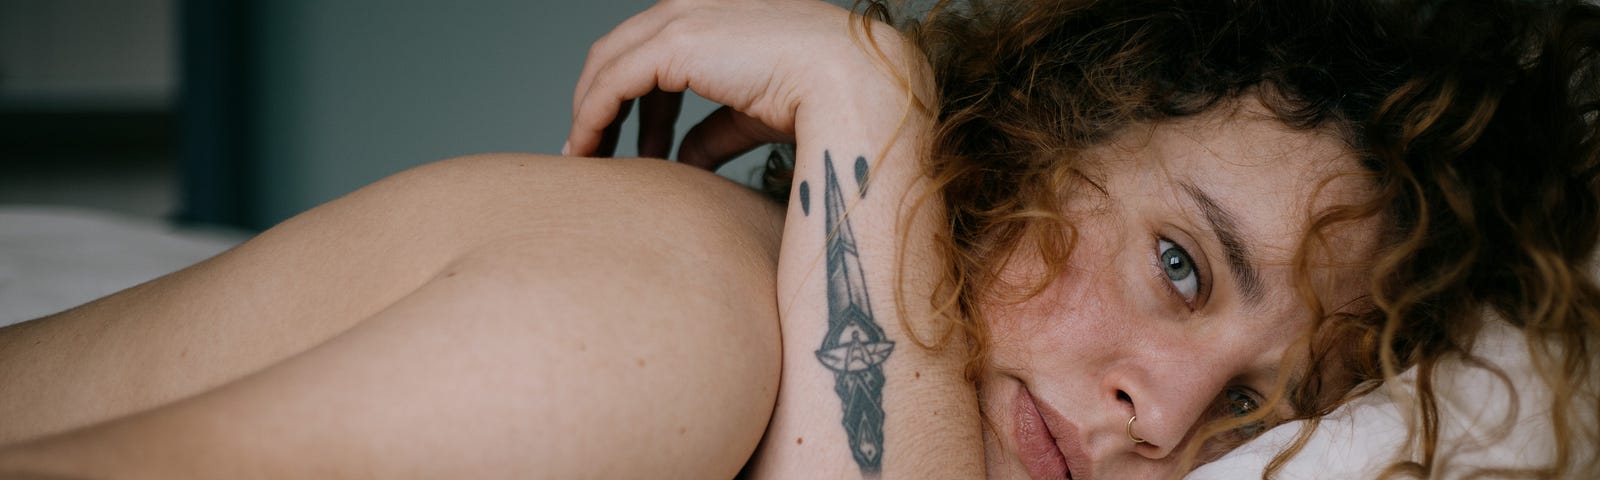 woman lies in bed, one arm up showing dagger tattoo